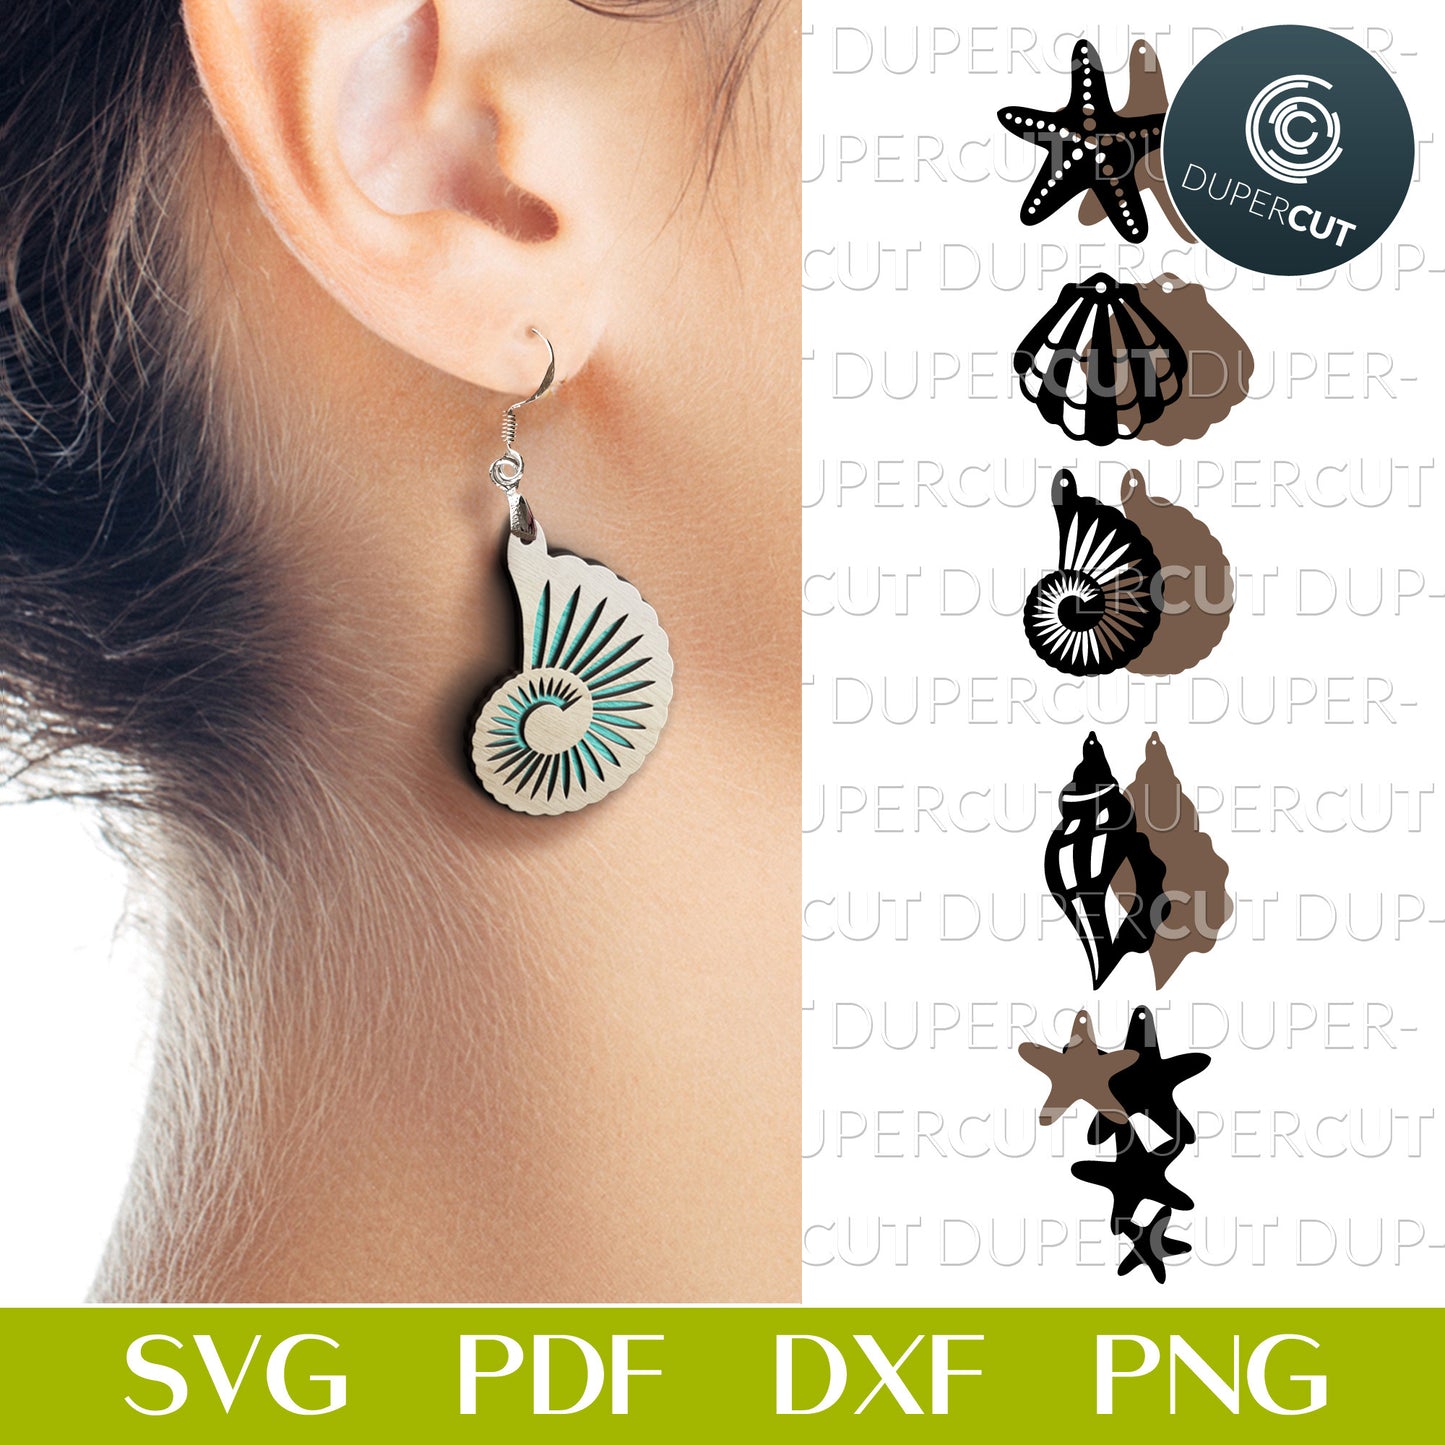 Layered beach seashells earrings, SVG PDF DXF files for laser cutting on wood, leather, acrylic. Use with Glowforge, Cricut, Silhouette cameo.